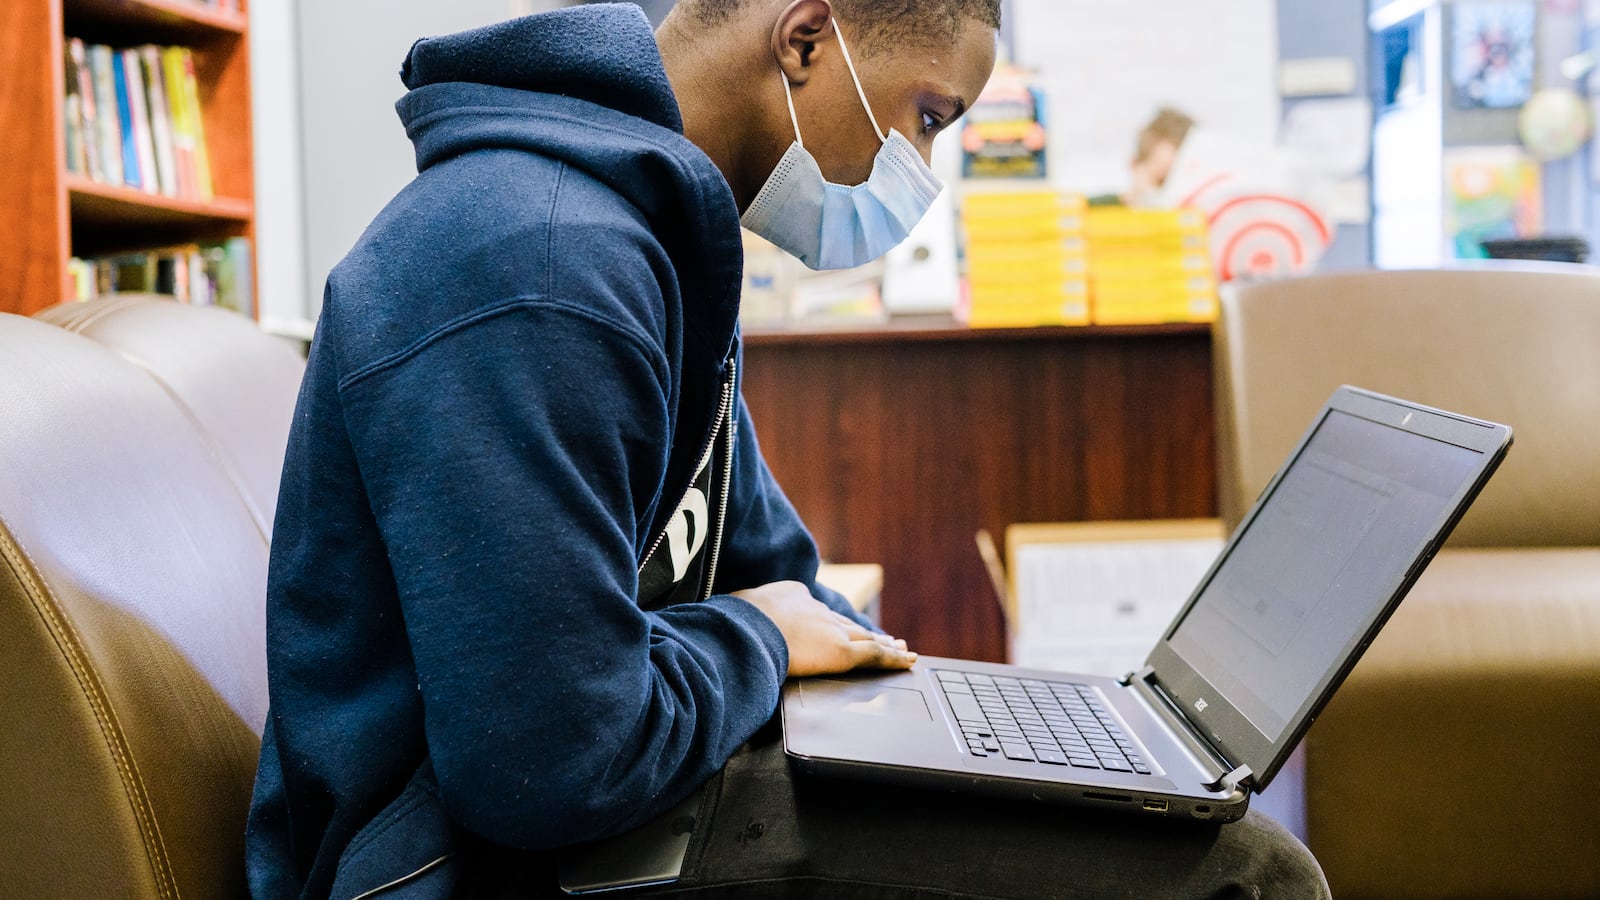 A teenager male in a blue sweatshirt is looking at a computer in a classroom. He is wearing a mask.